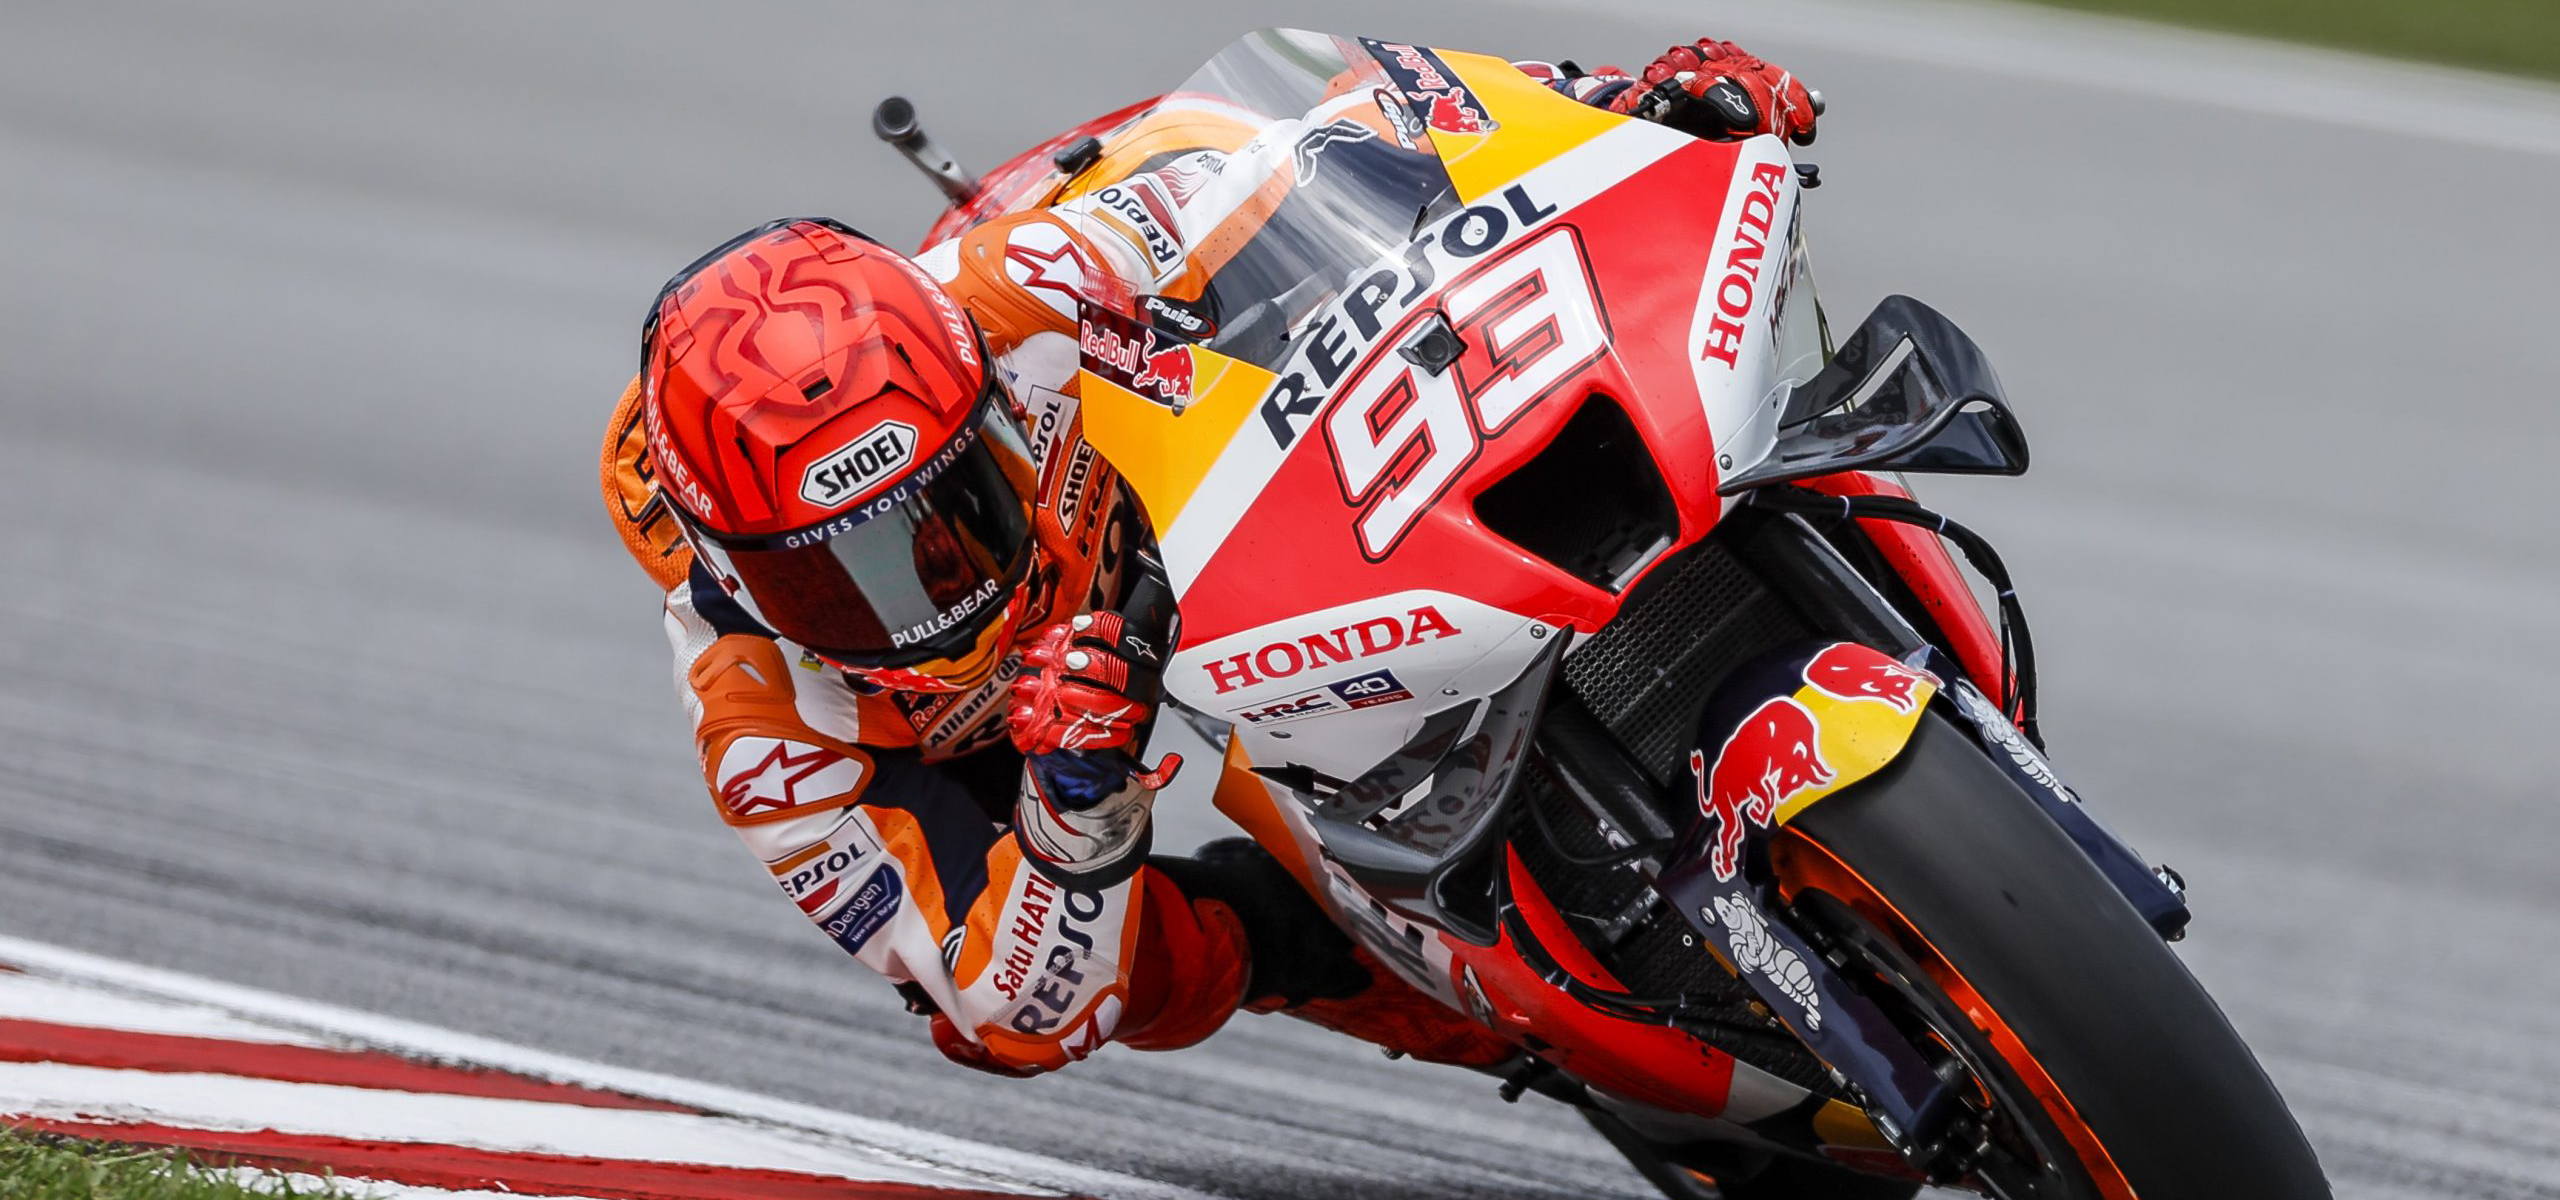 Márquez back among the fastest riders in Malaysia